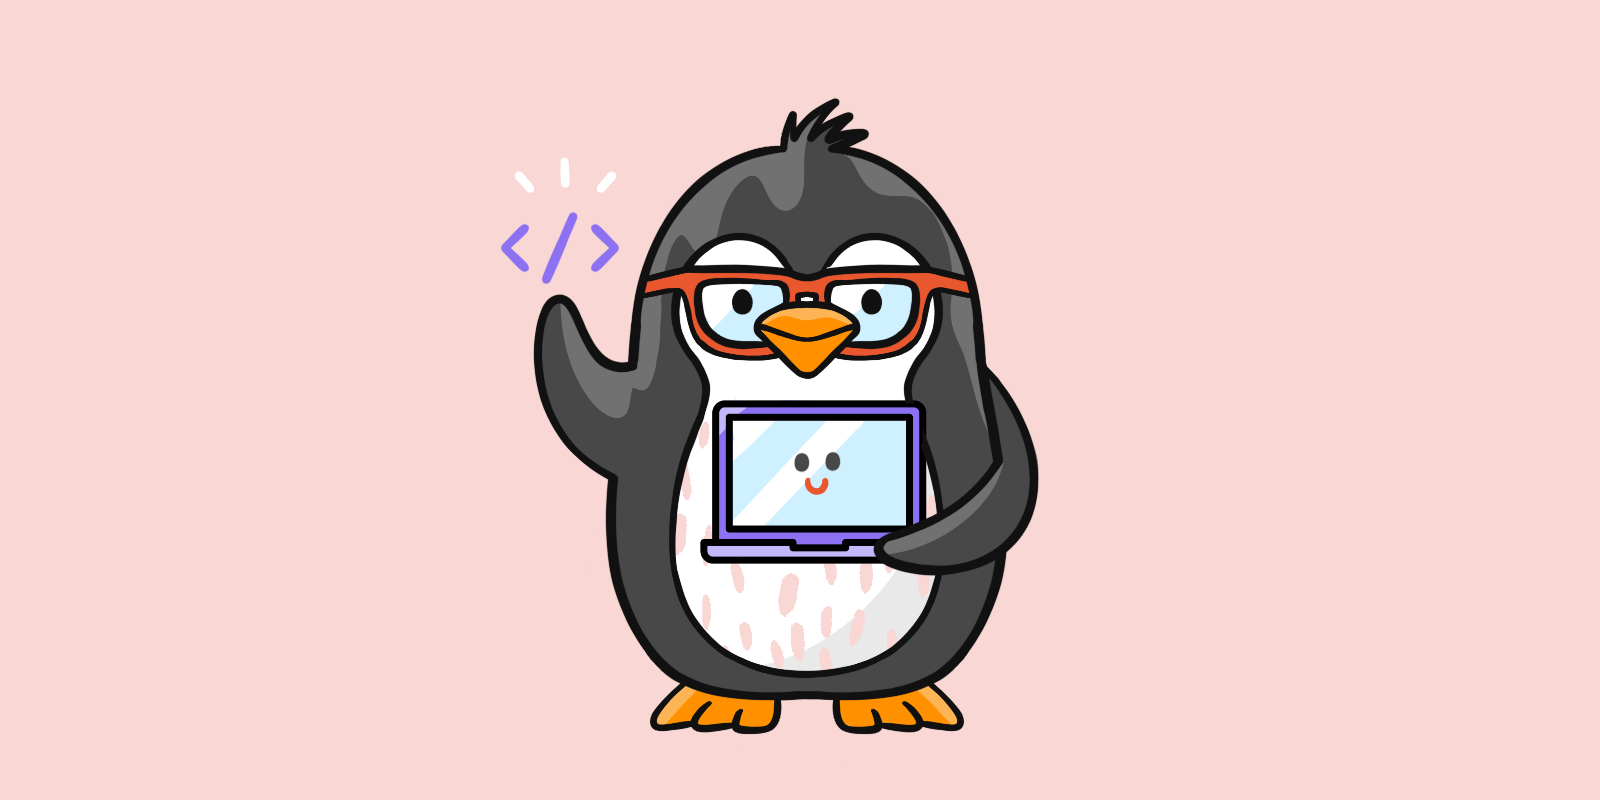 An illustrated image of a nerdy penguin over a pink background